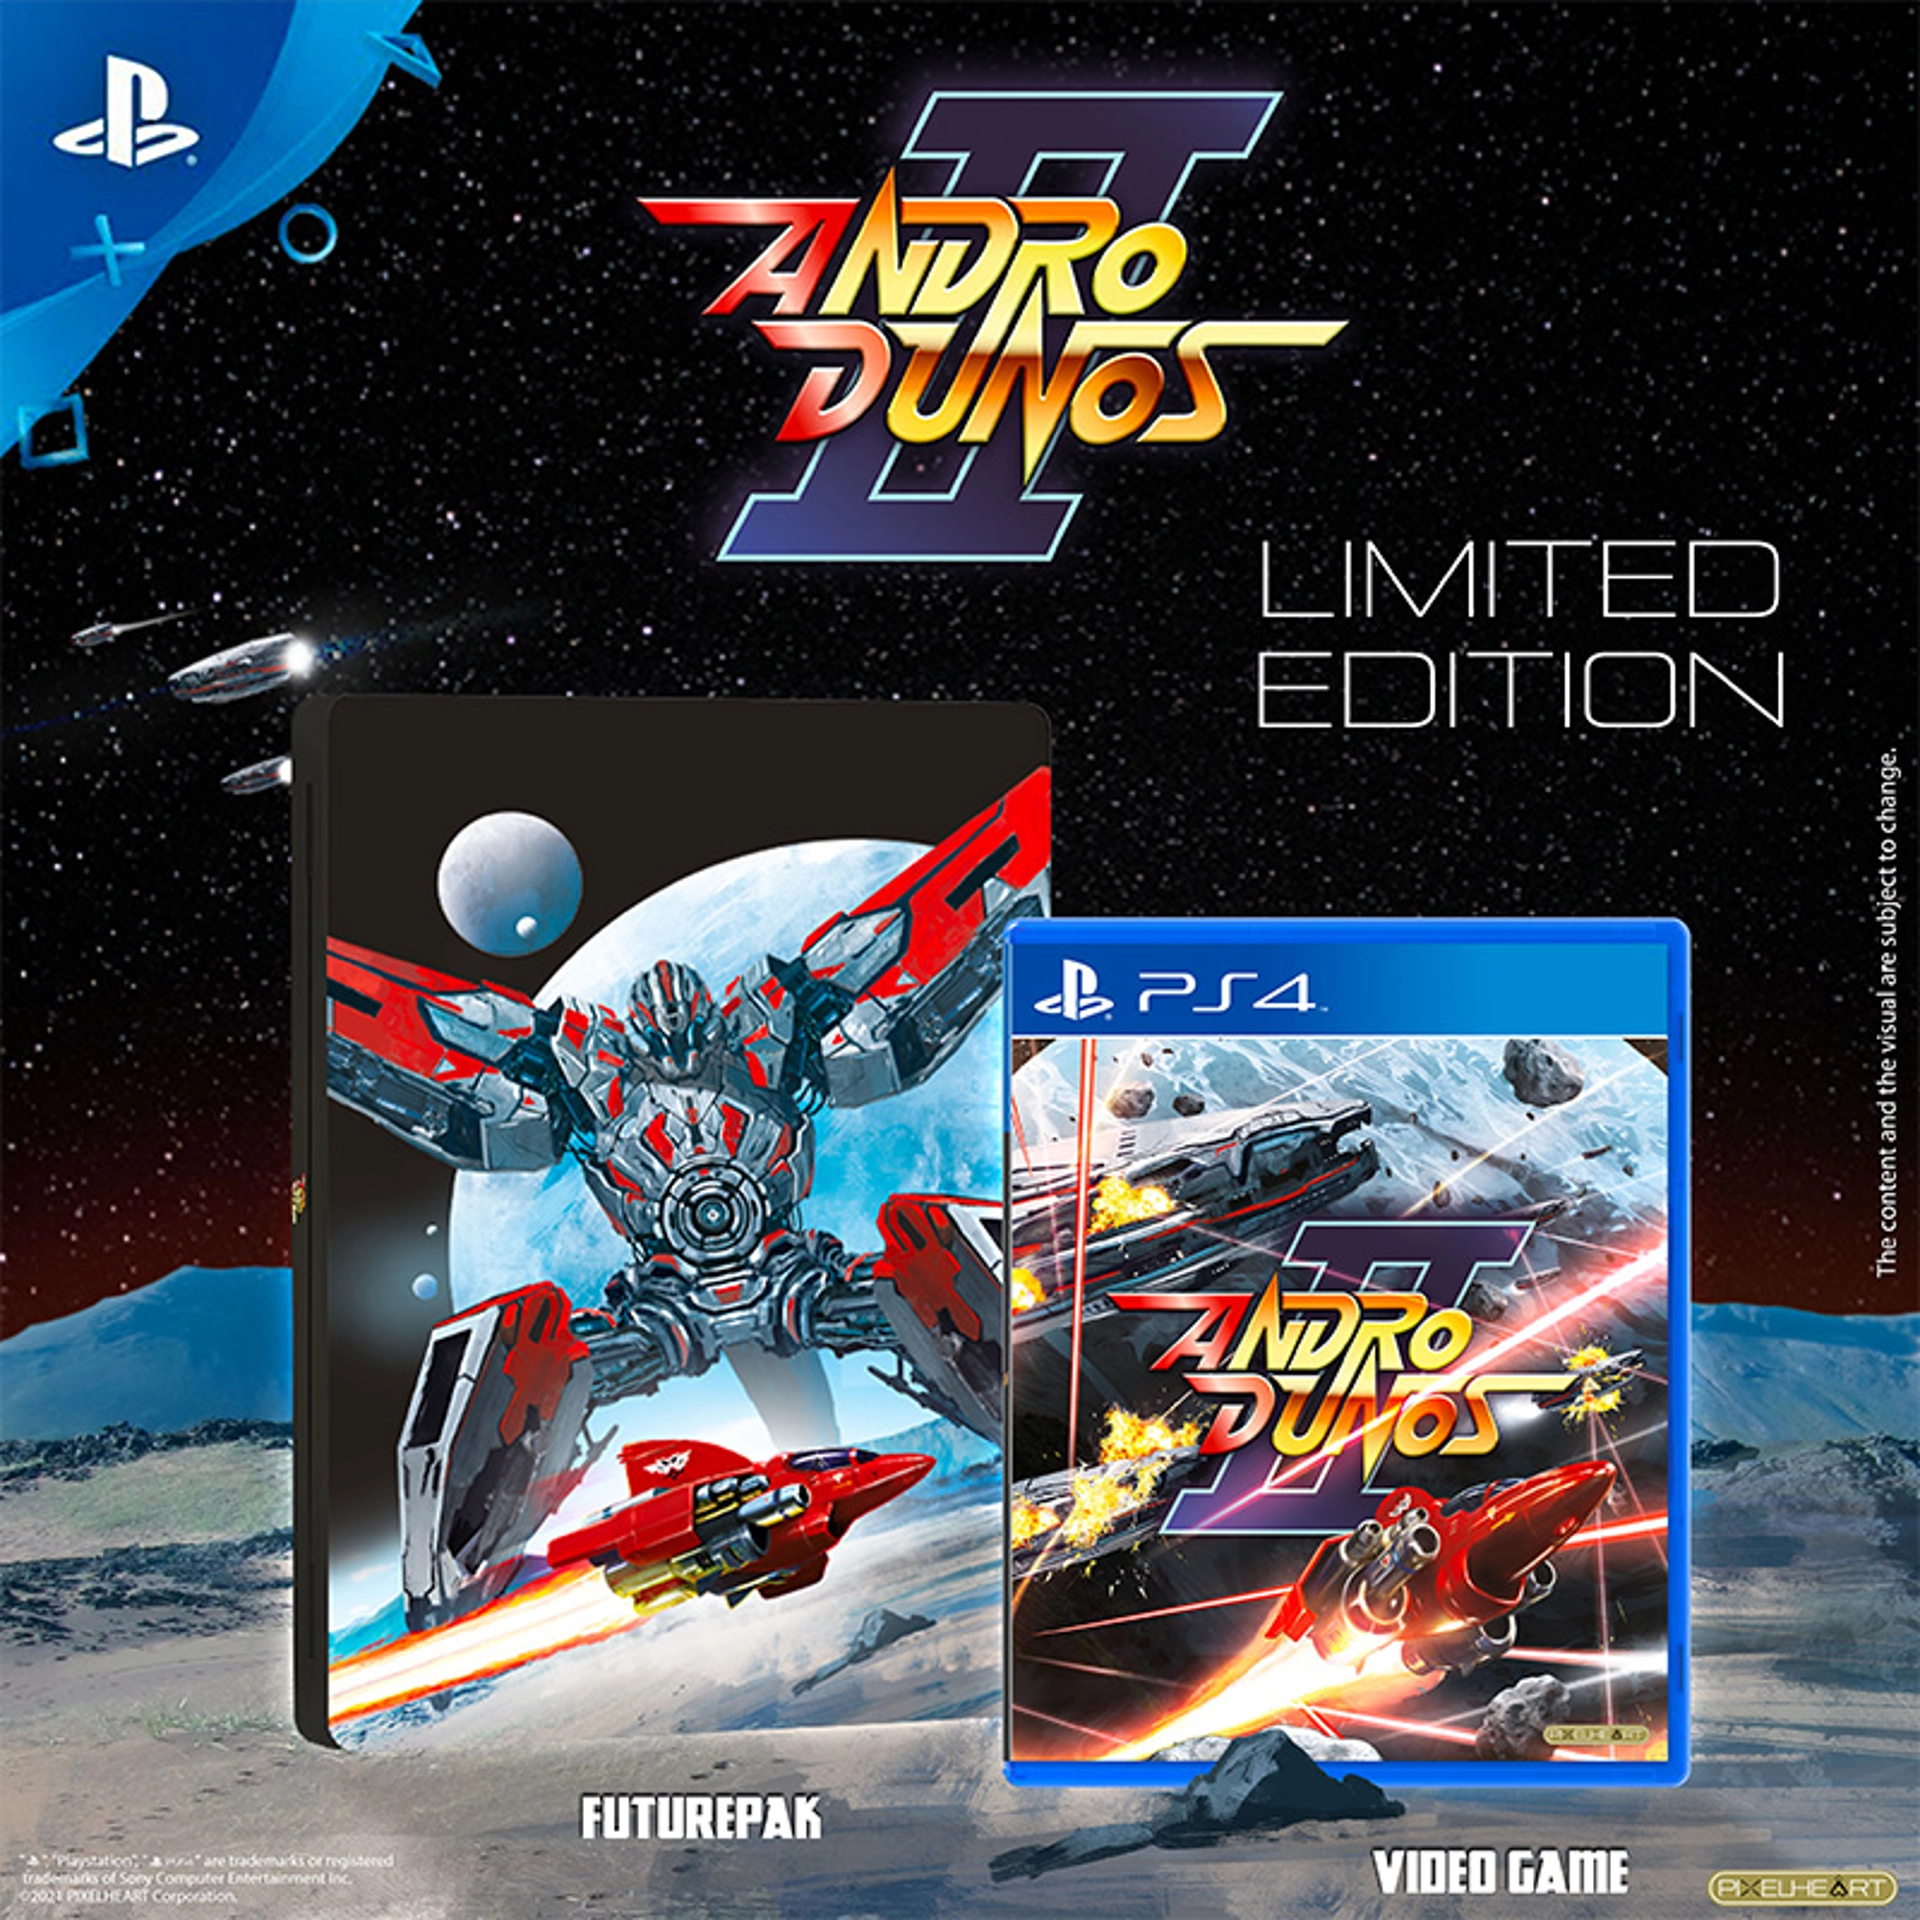 Andro Dunos 2 - Limited Edition (PS4), Just for Games 